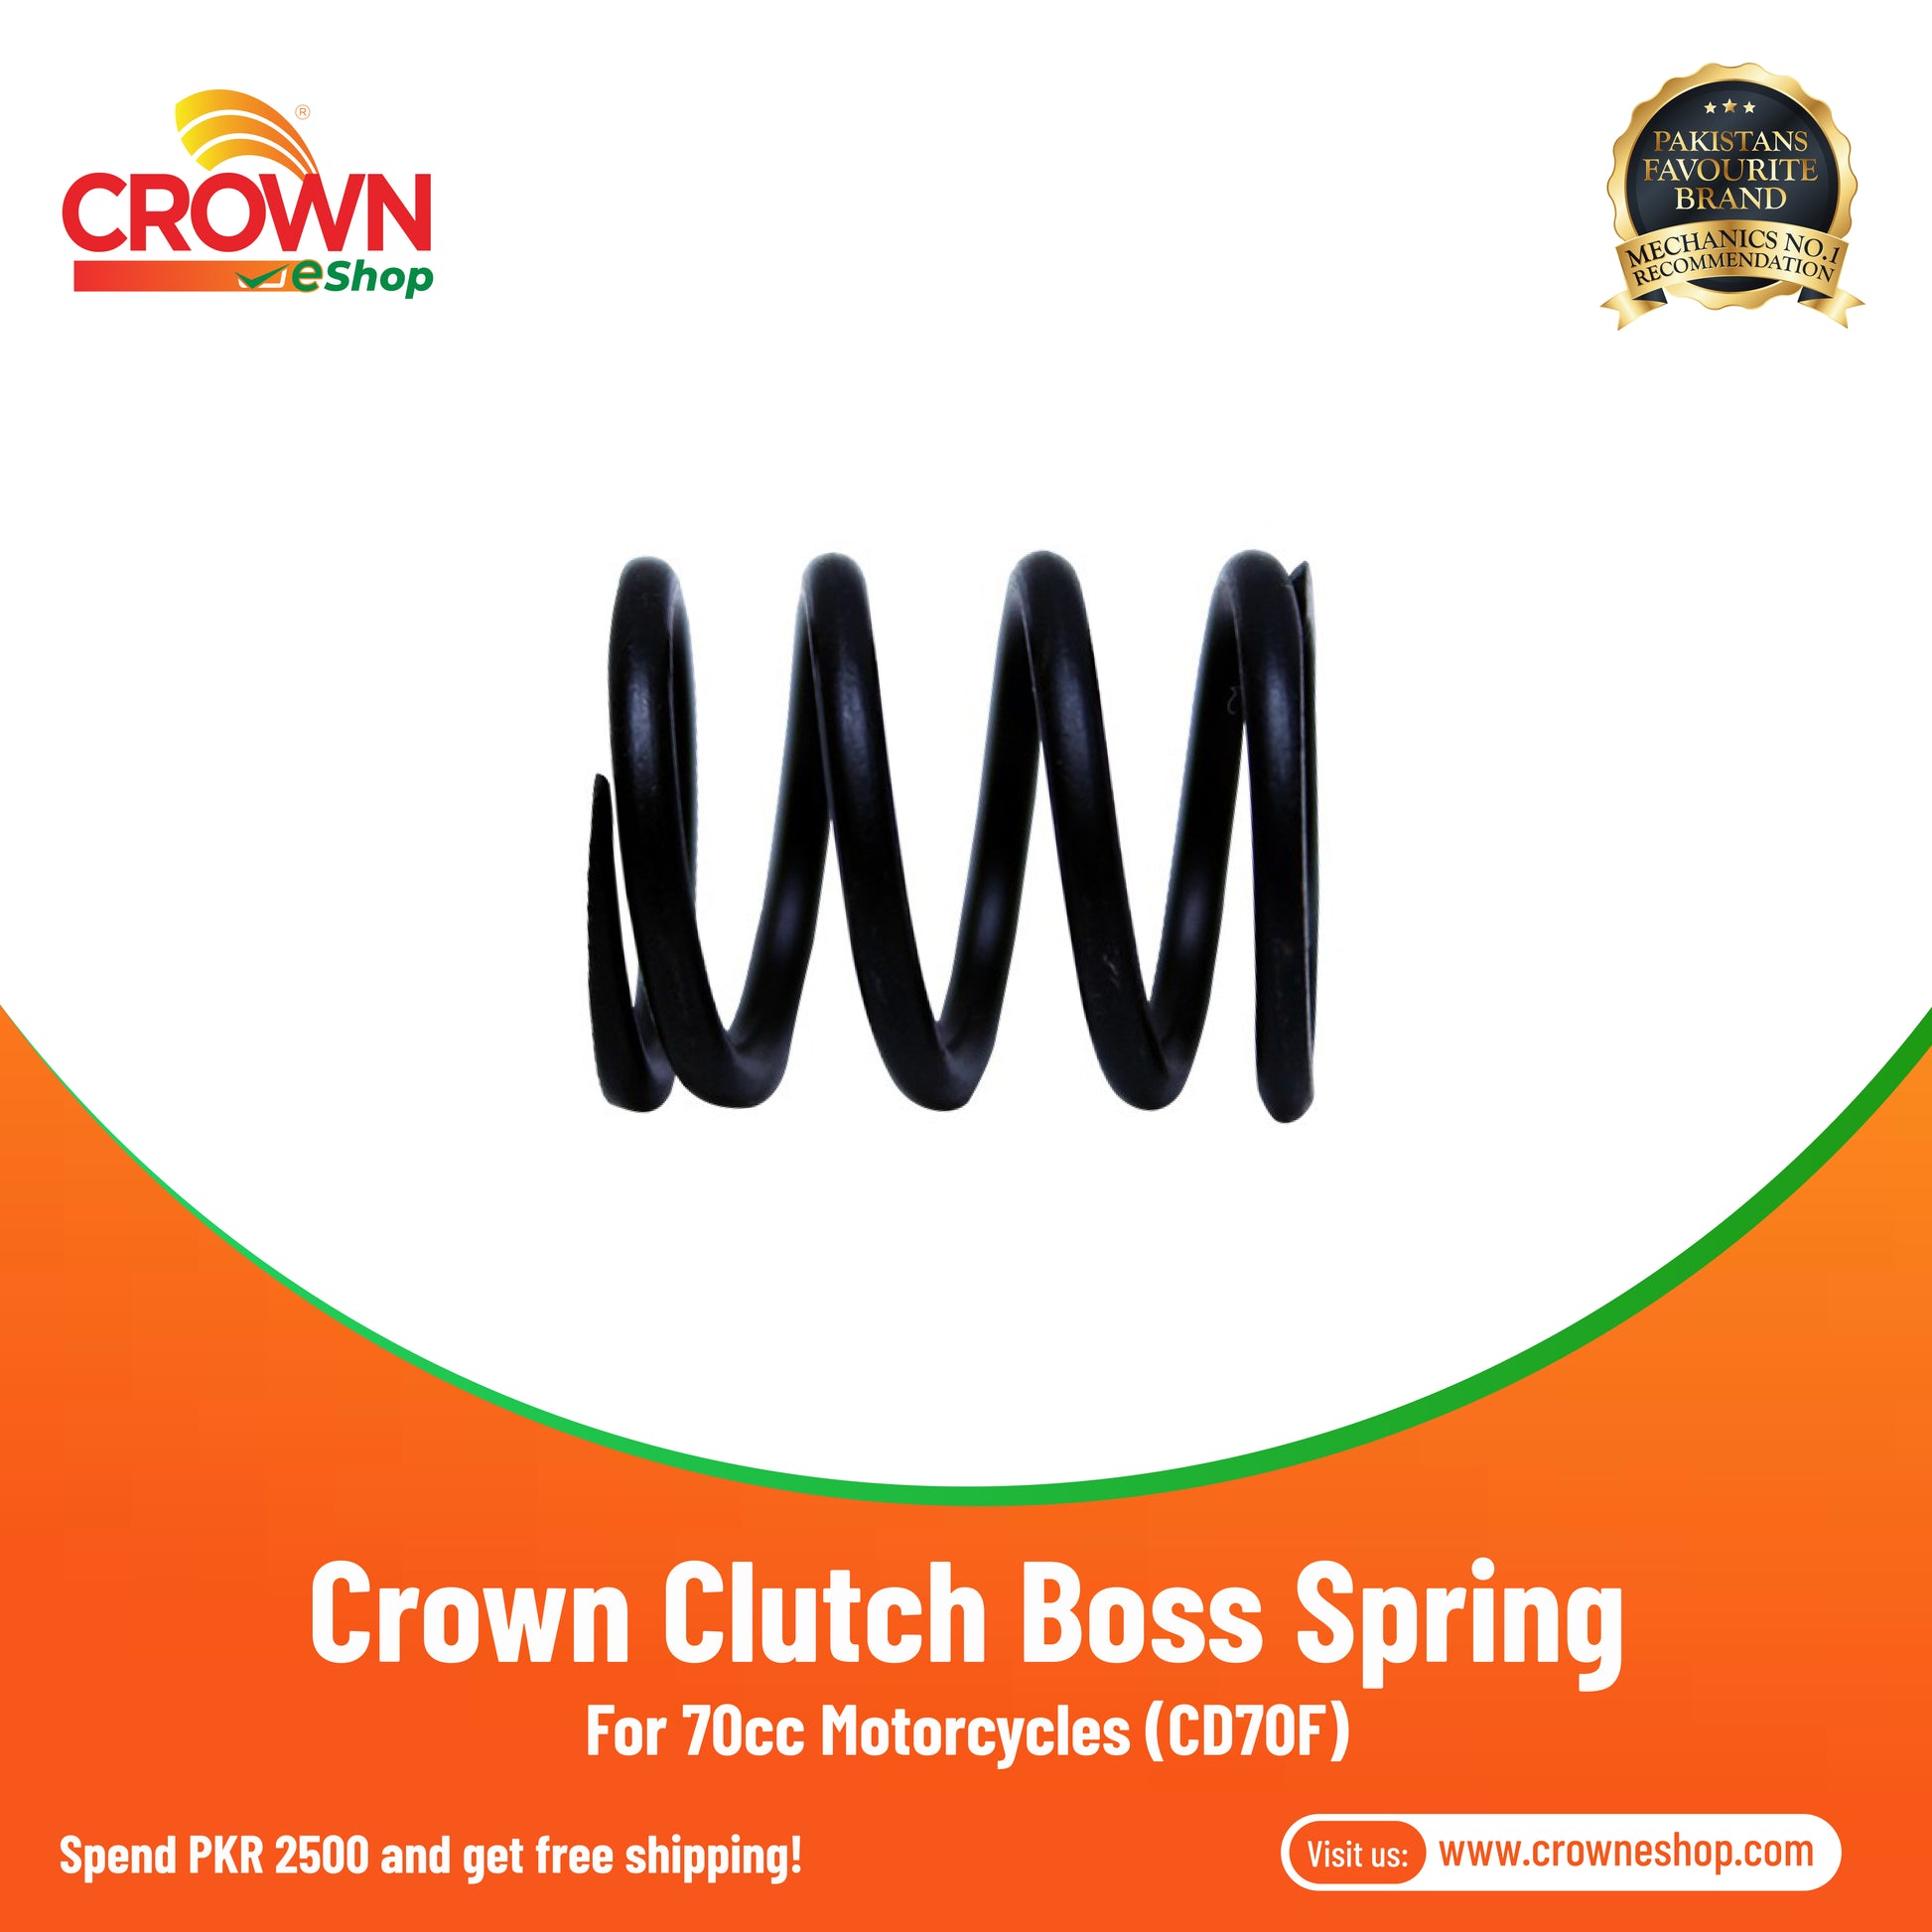 Crown Clutch Boss Spring for 70cc Motorcycles (CD70F) - Crowneshop